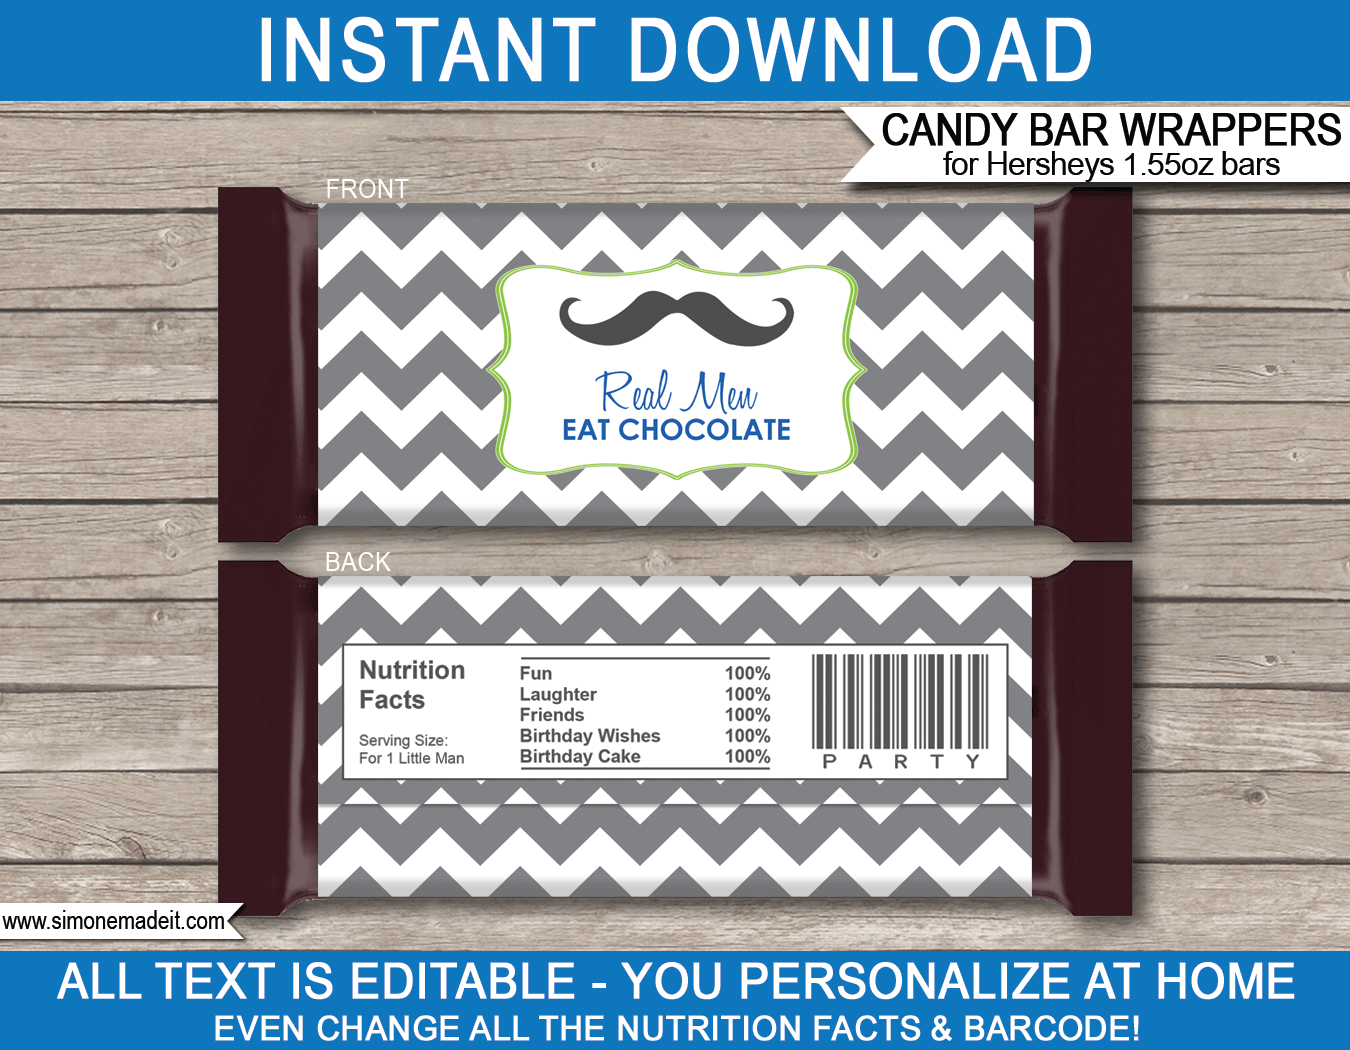 Mustache Hershey Candy Bar Wrappers | Little Man | Birthday Party Favors | Personalized Candy Bars | Editable Template | INSTANT DOWNLOAD $3.00 via simonemadeit.com